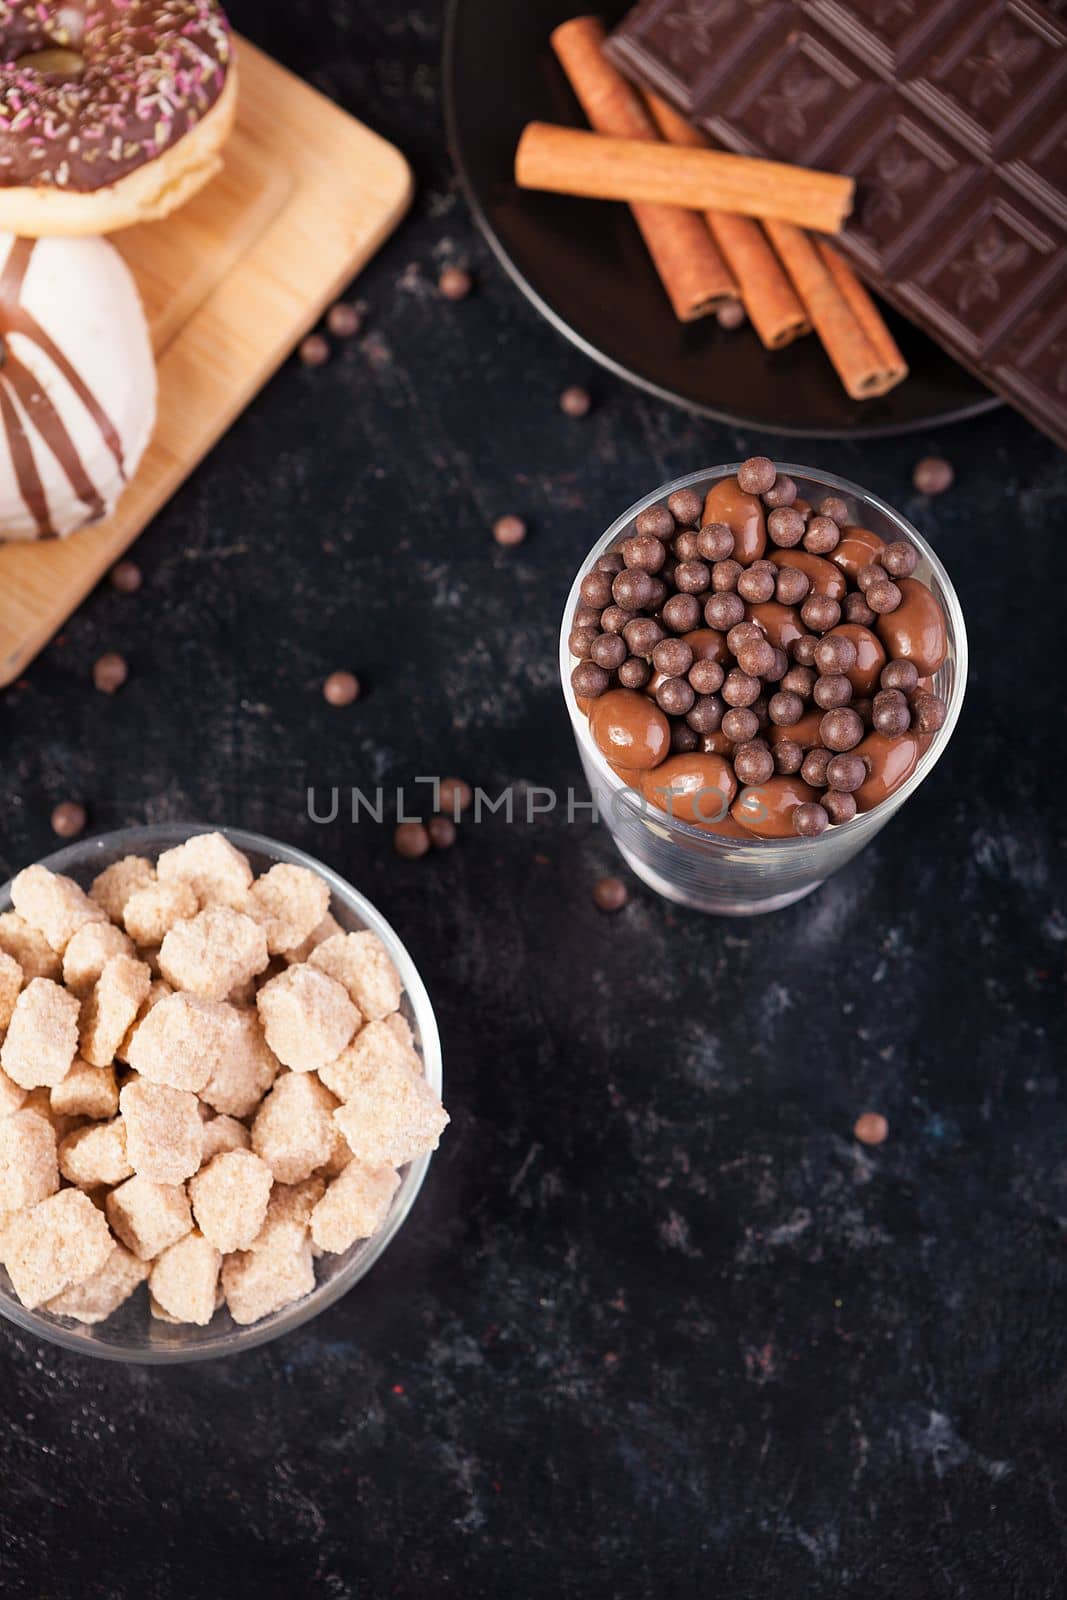 Chocolate tablet next to other candies by DCStudio